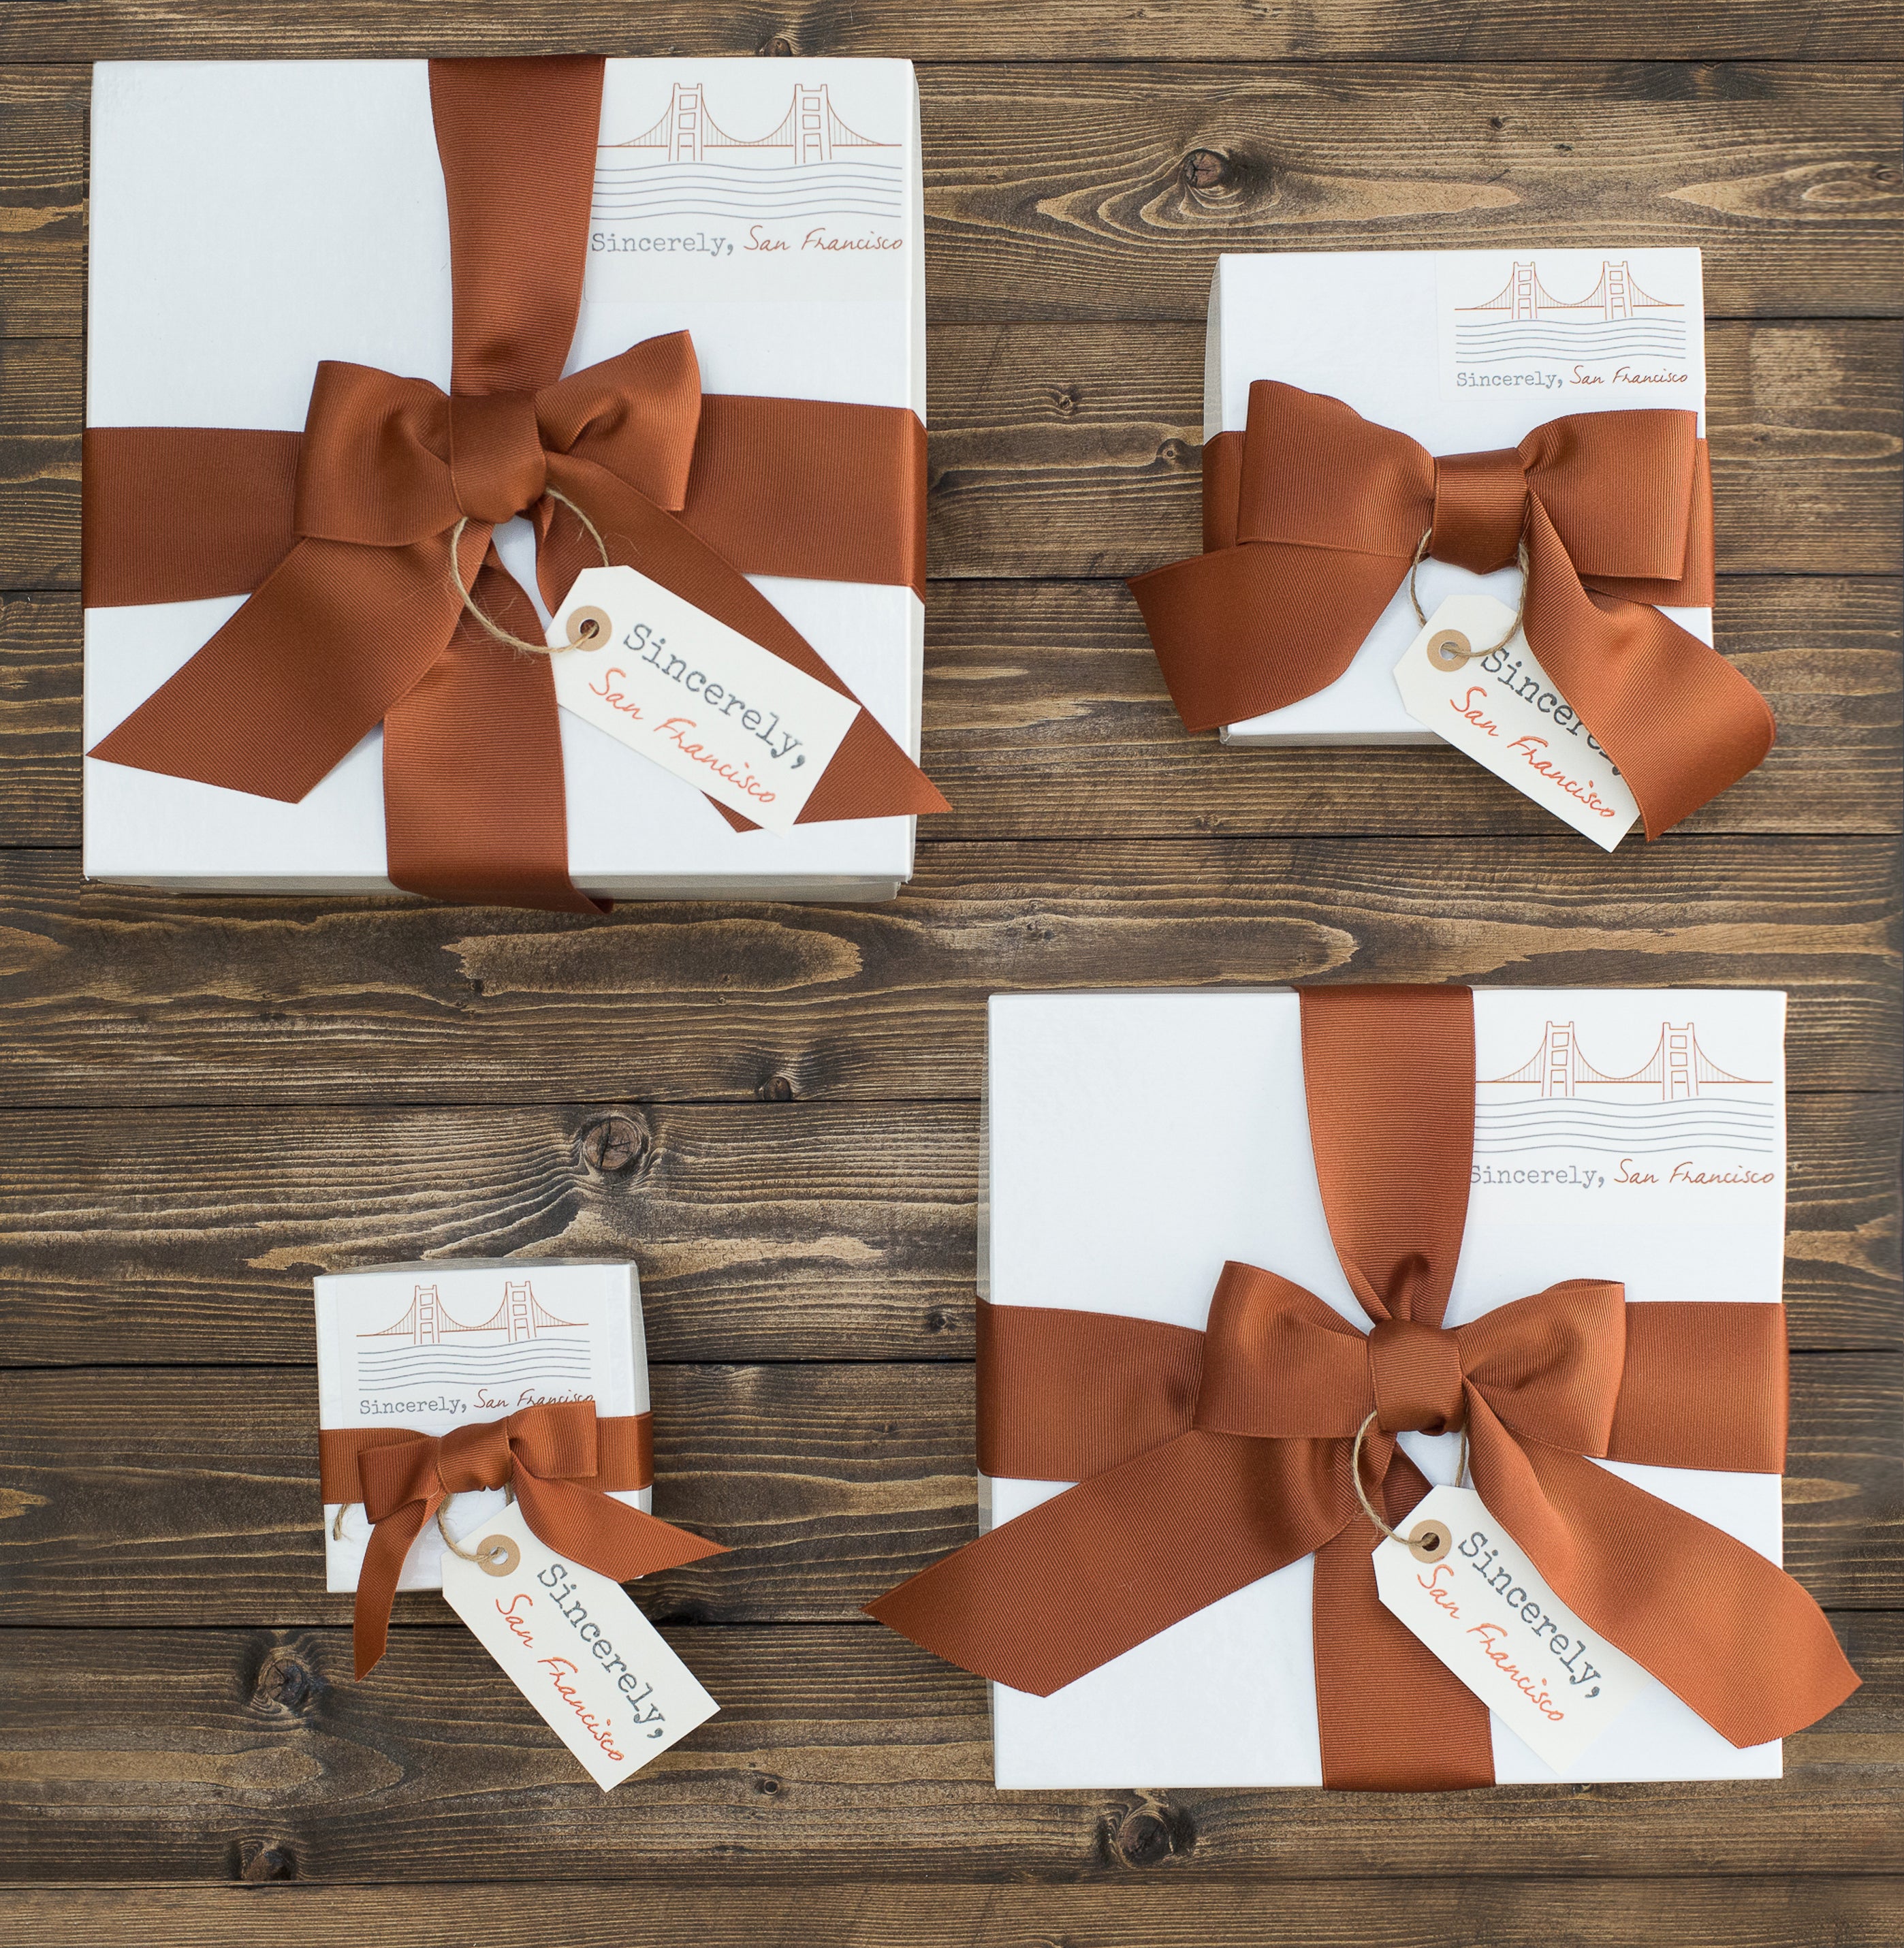 Gifting Services